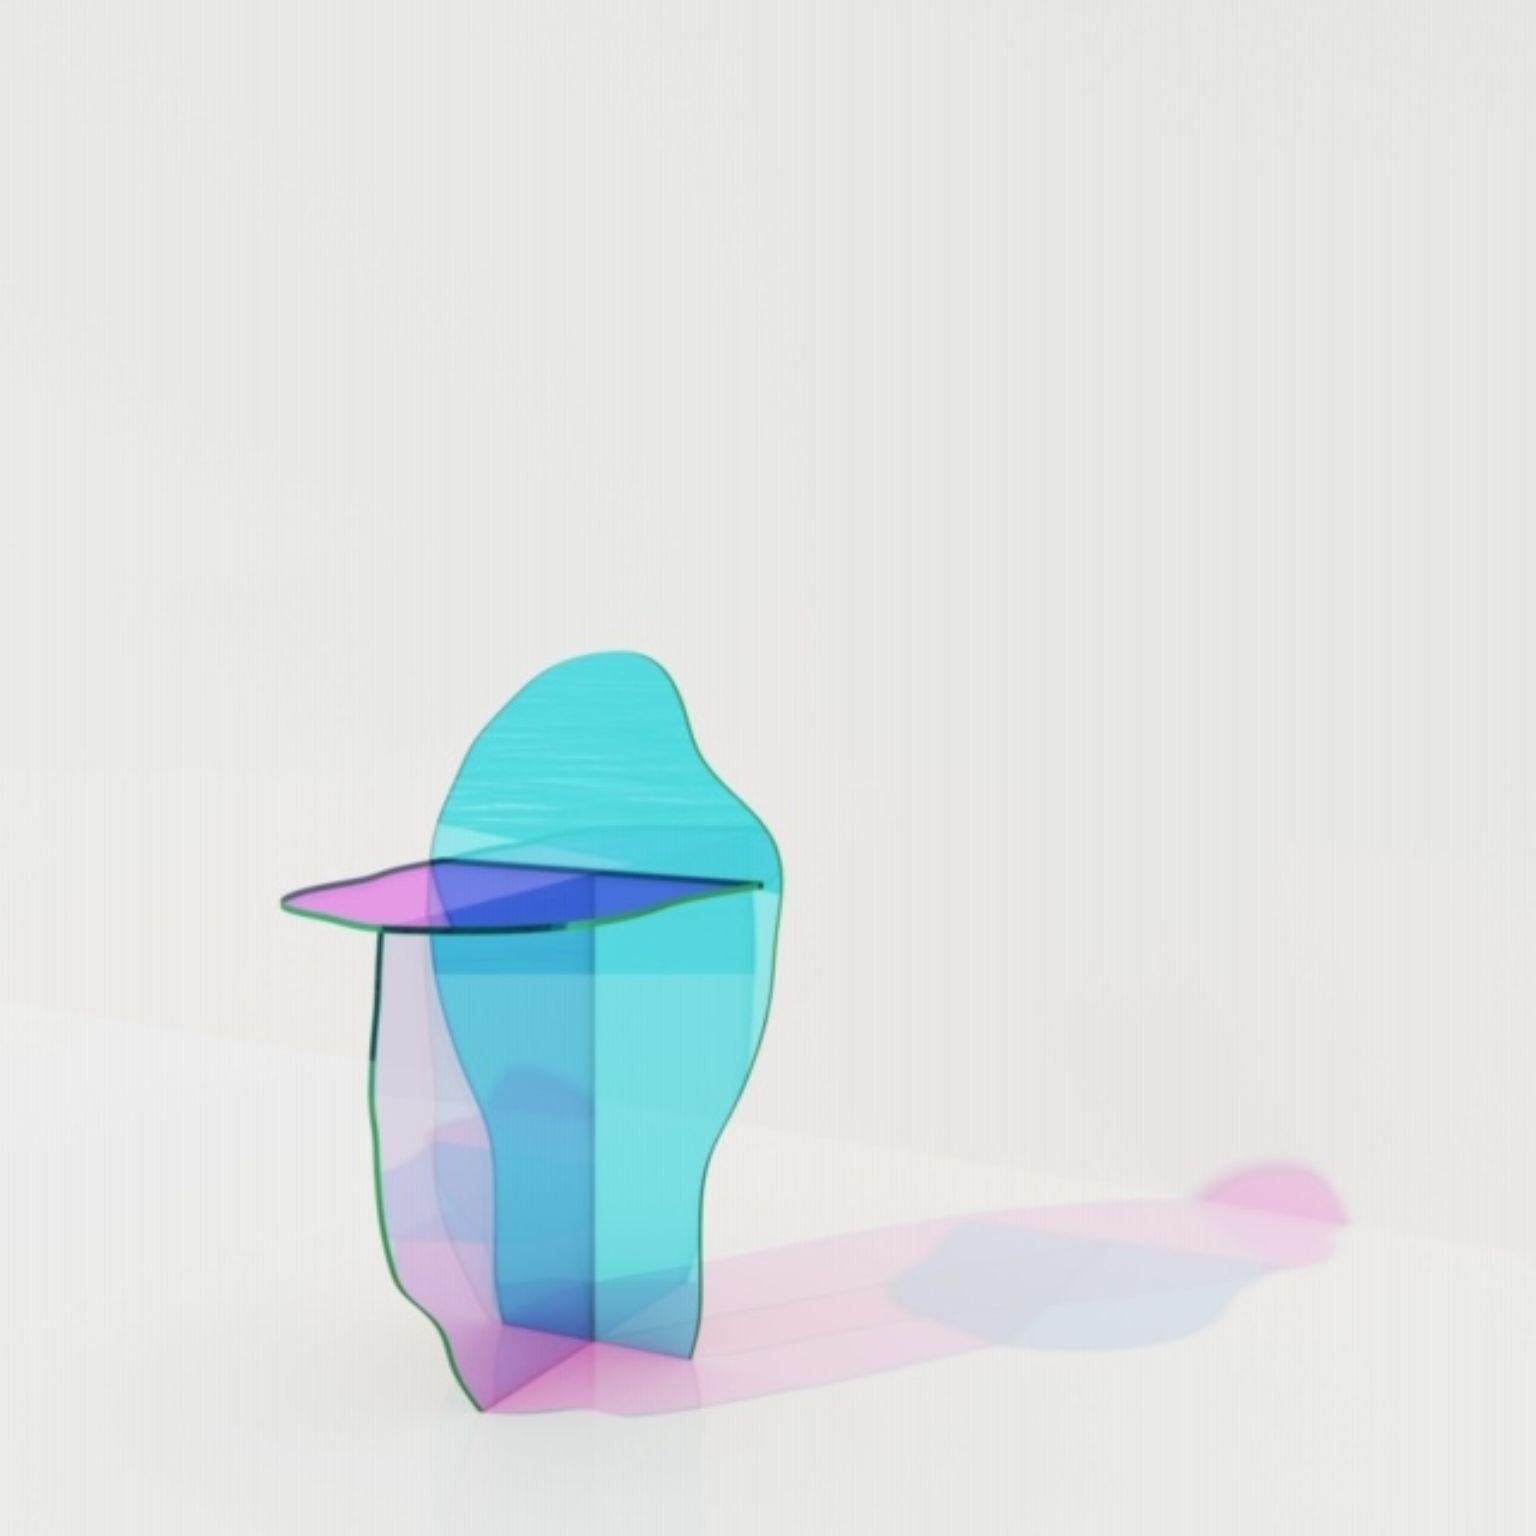 Isola chair by Brajak Vitberg
Dimensions: 43 x 55 x 85 cm
Materials: Dichroic glass

Can be made in Satin glass finish. 

Bijelic and Brajak are two architects from Ljubljana, Slovenia.
They are striving to design Craft elements and make them